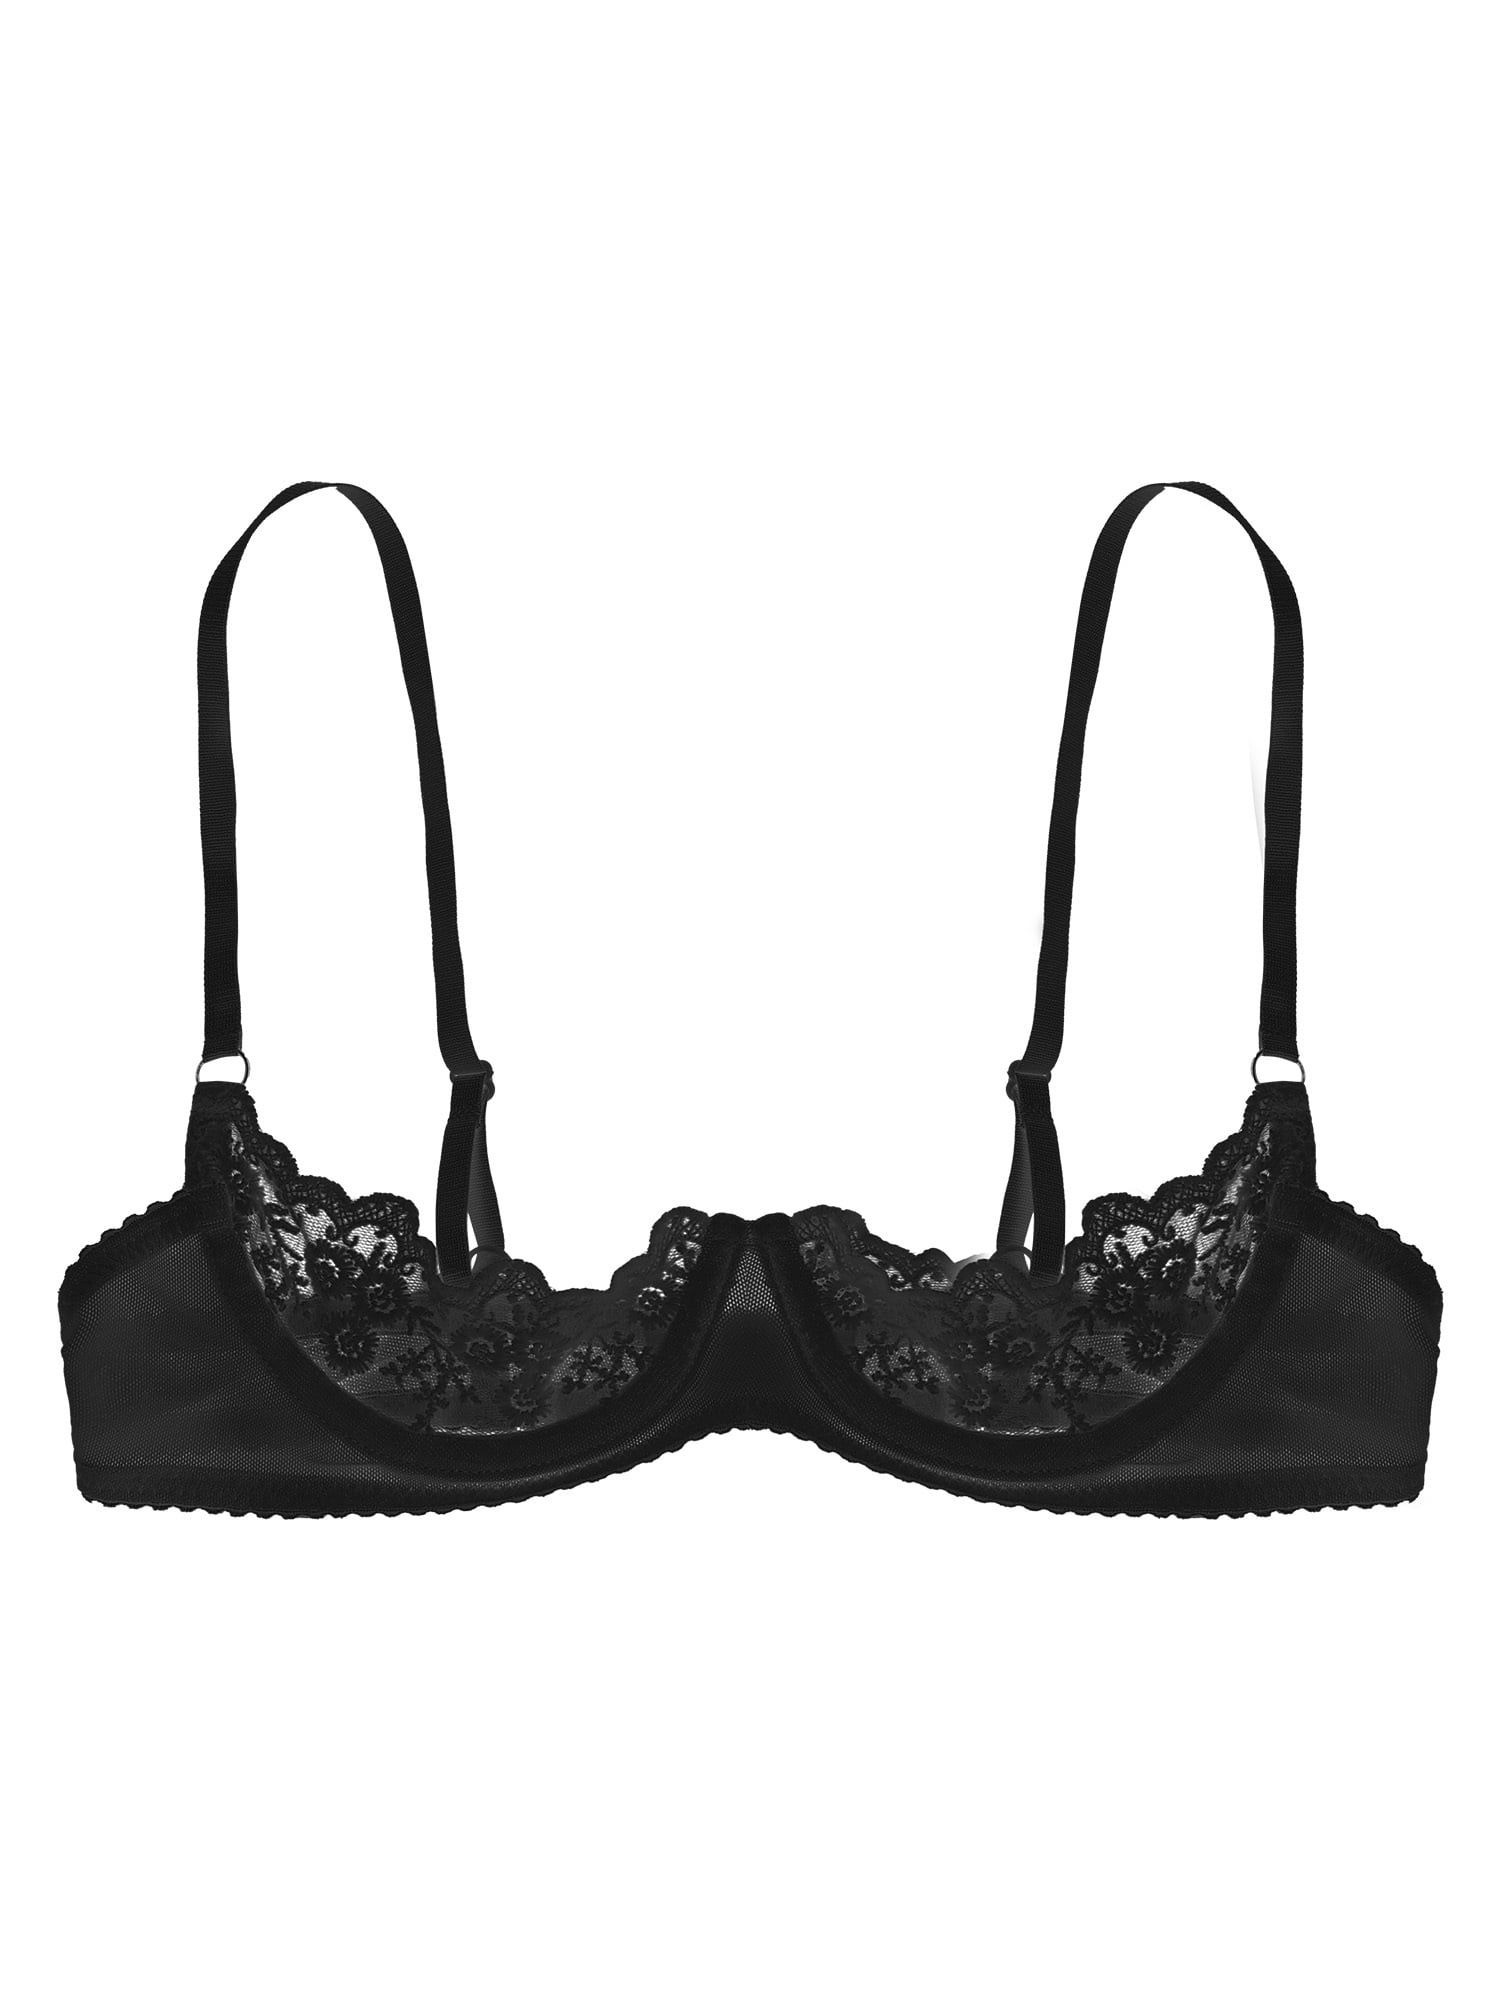 iiniim Woman's Lace Sheer Push Up Shelf Bra Lingerie Underwired Balconette  1/4 Cup Hollow Out Bralette 